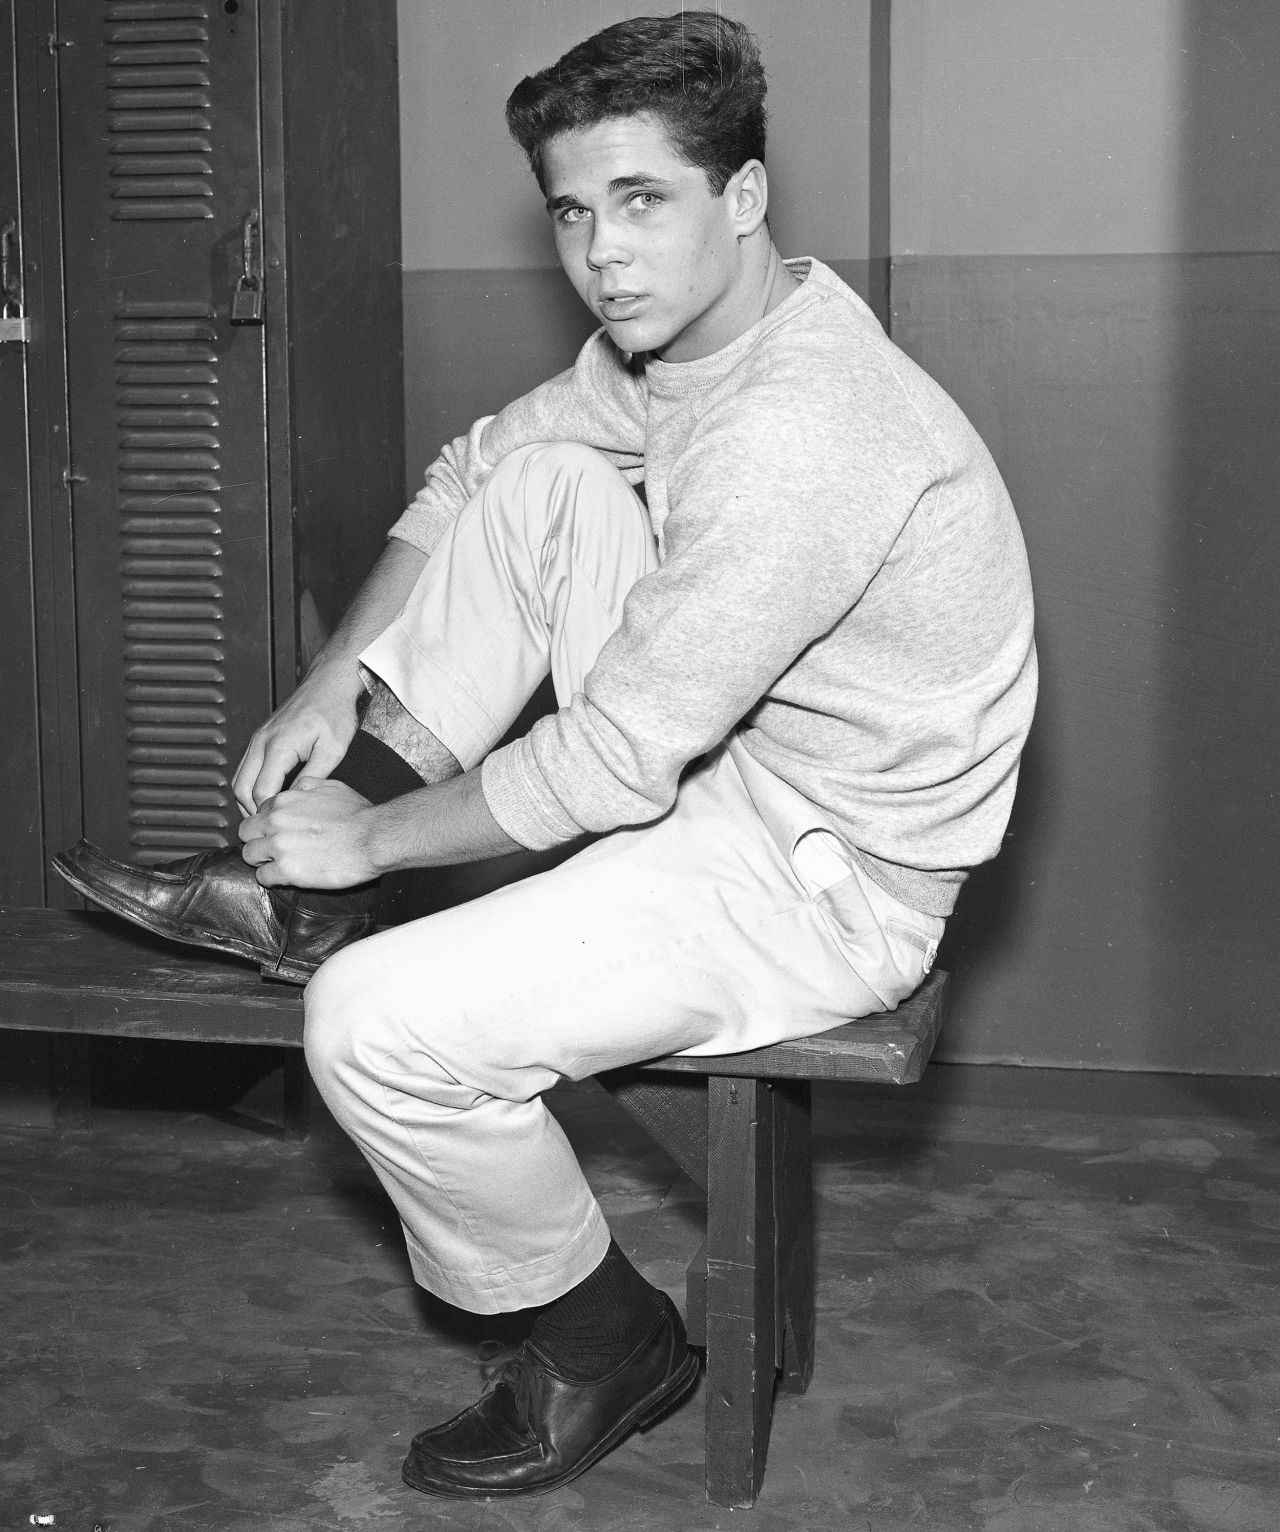 Tony Dow, an actor and director best known for portraying Wally Cleaver on the sitcom 